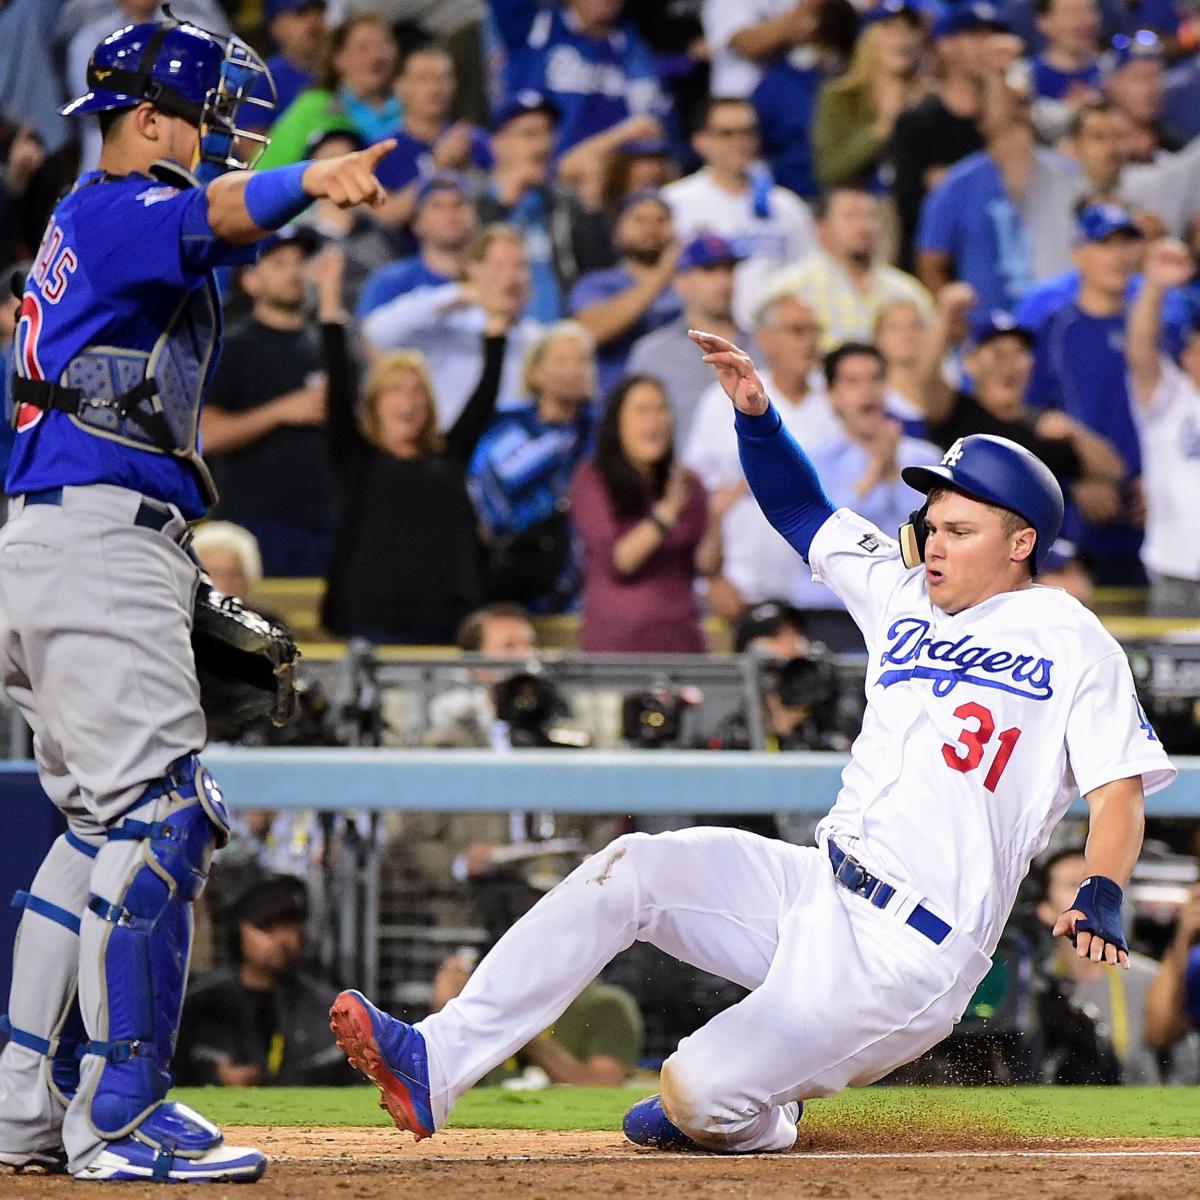 Cubs vs. Dodgers NLCS Game 4 TV Schedule, Preview, and Pick News